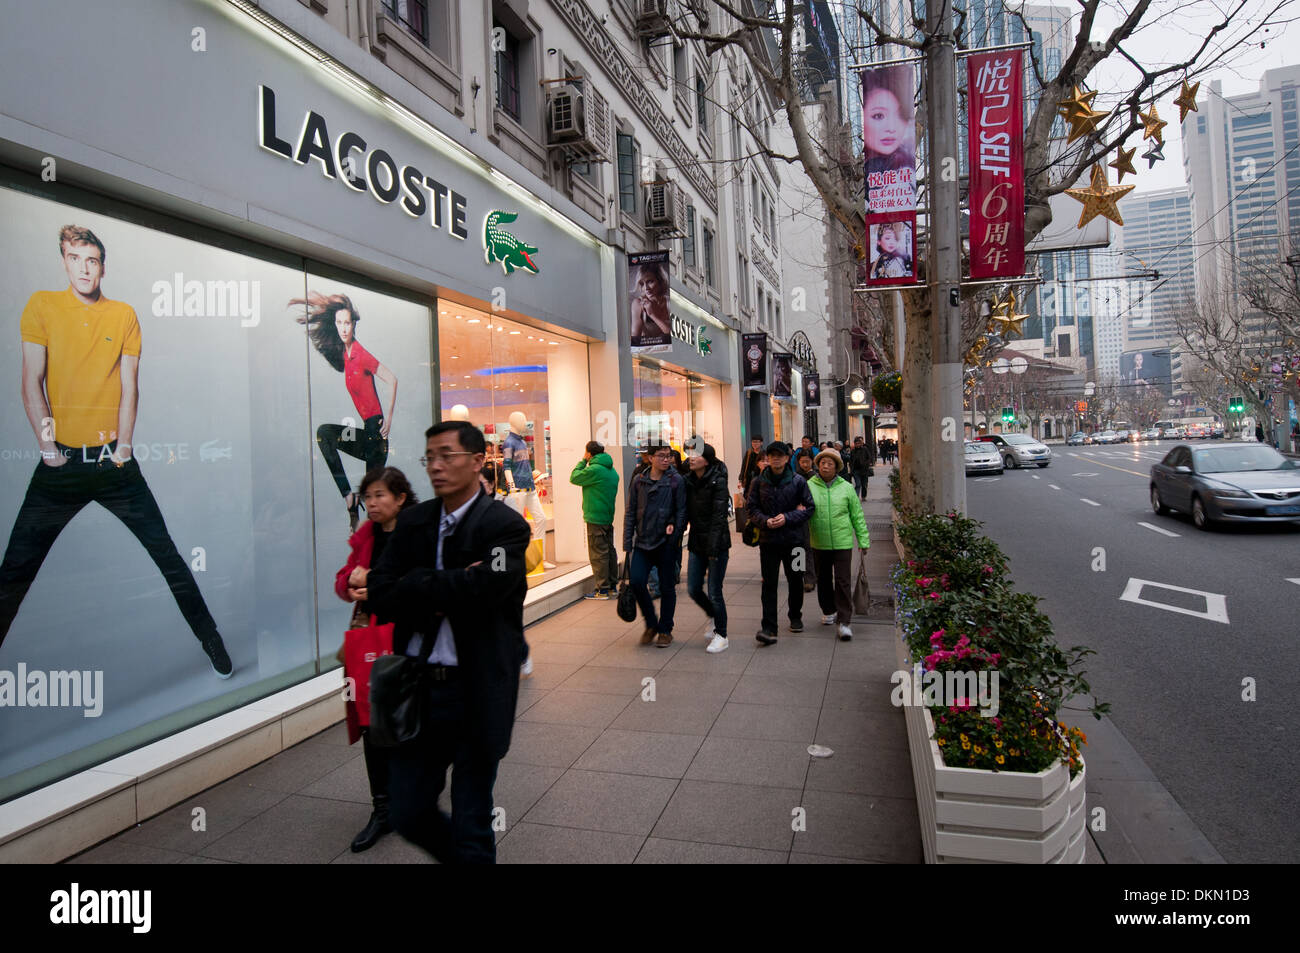 Lacoste shop at West Nanjing Road - famous shopping street in Shanghai, China Stock Photo